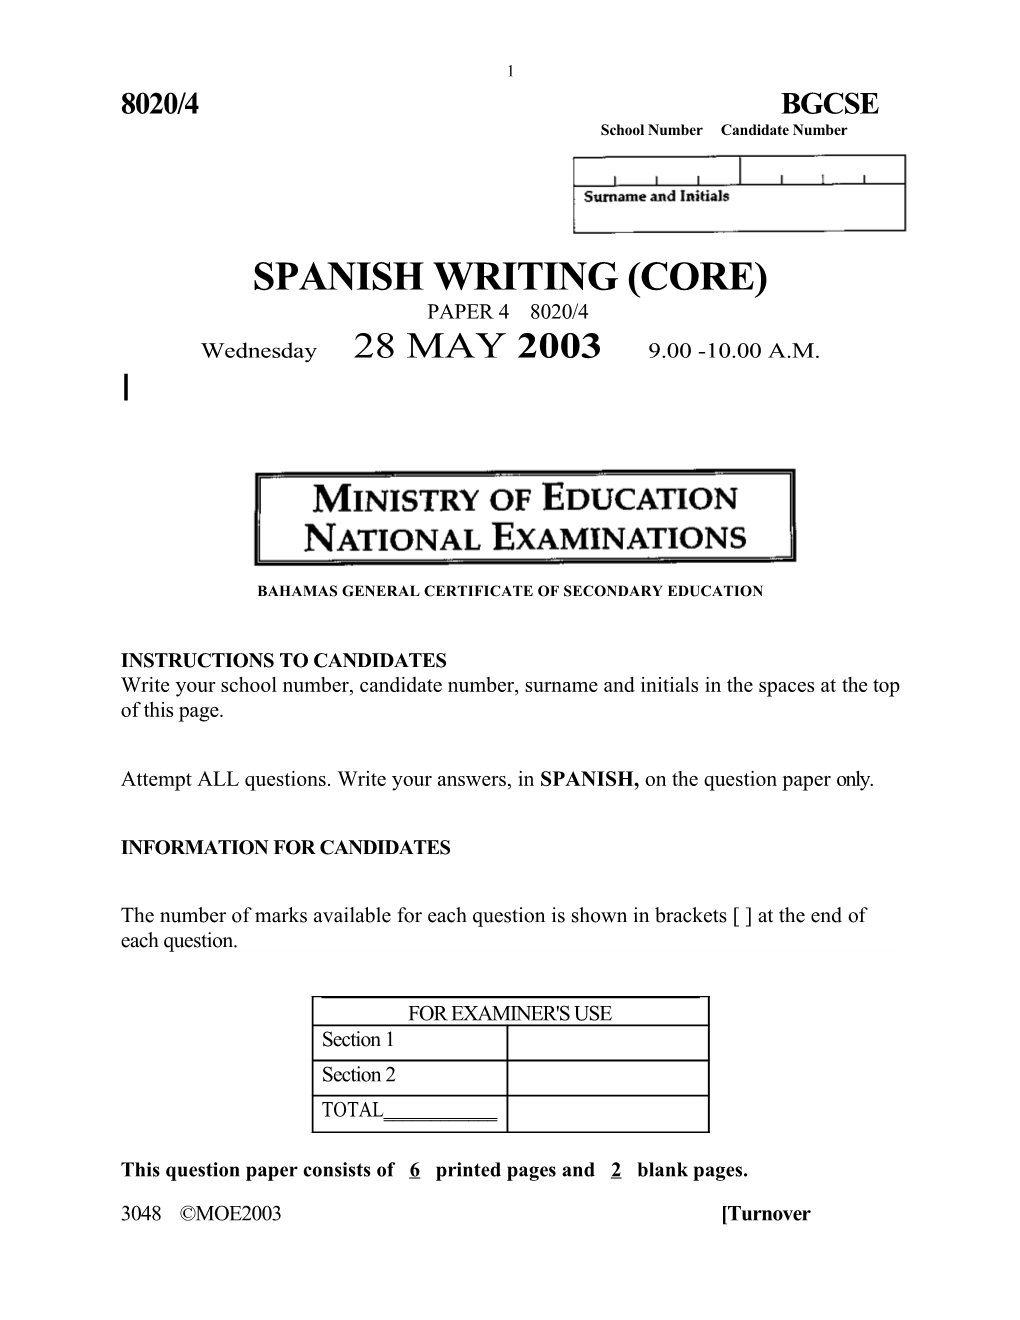 Bahamas General Certificate of Secondary Education